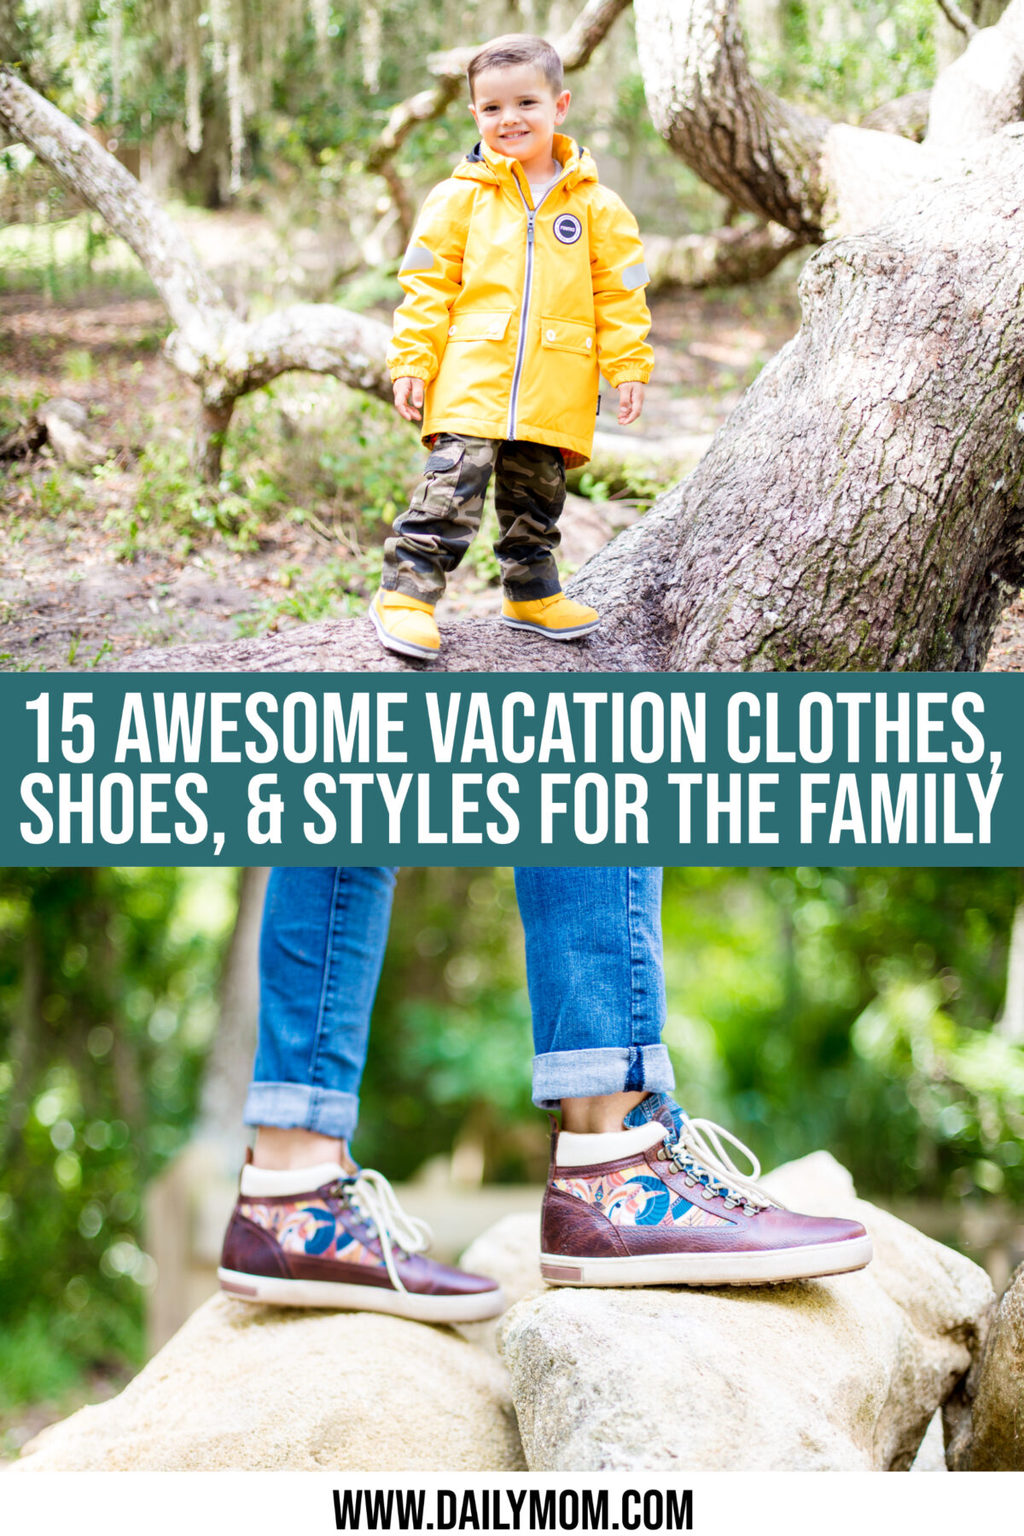 15 Awesome Vacation Clothes, Shoes, & Styles For The Family